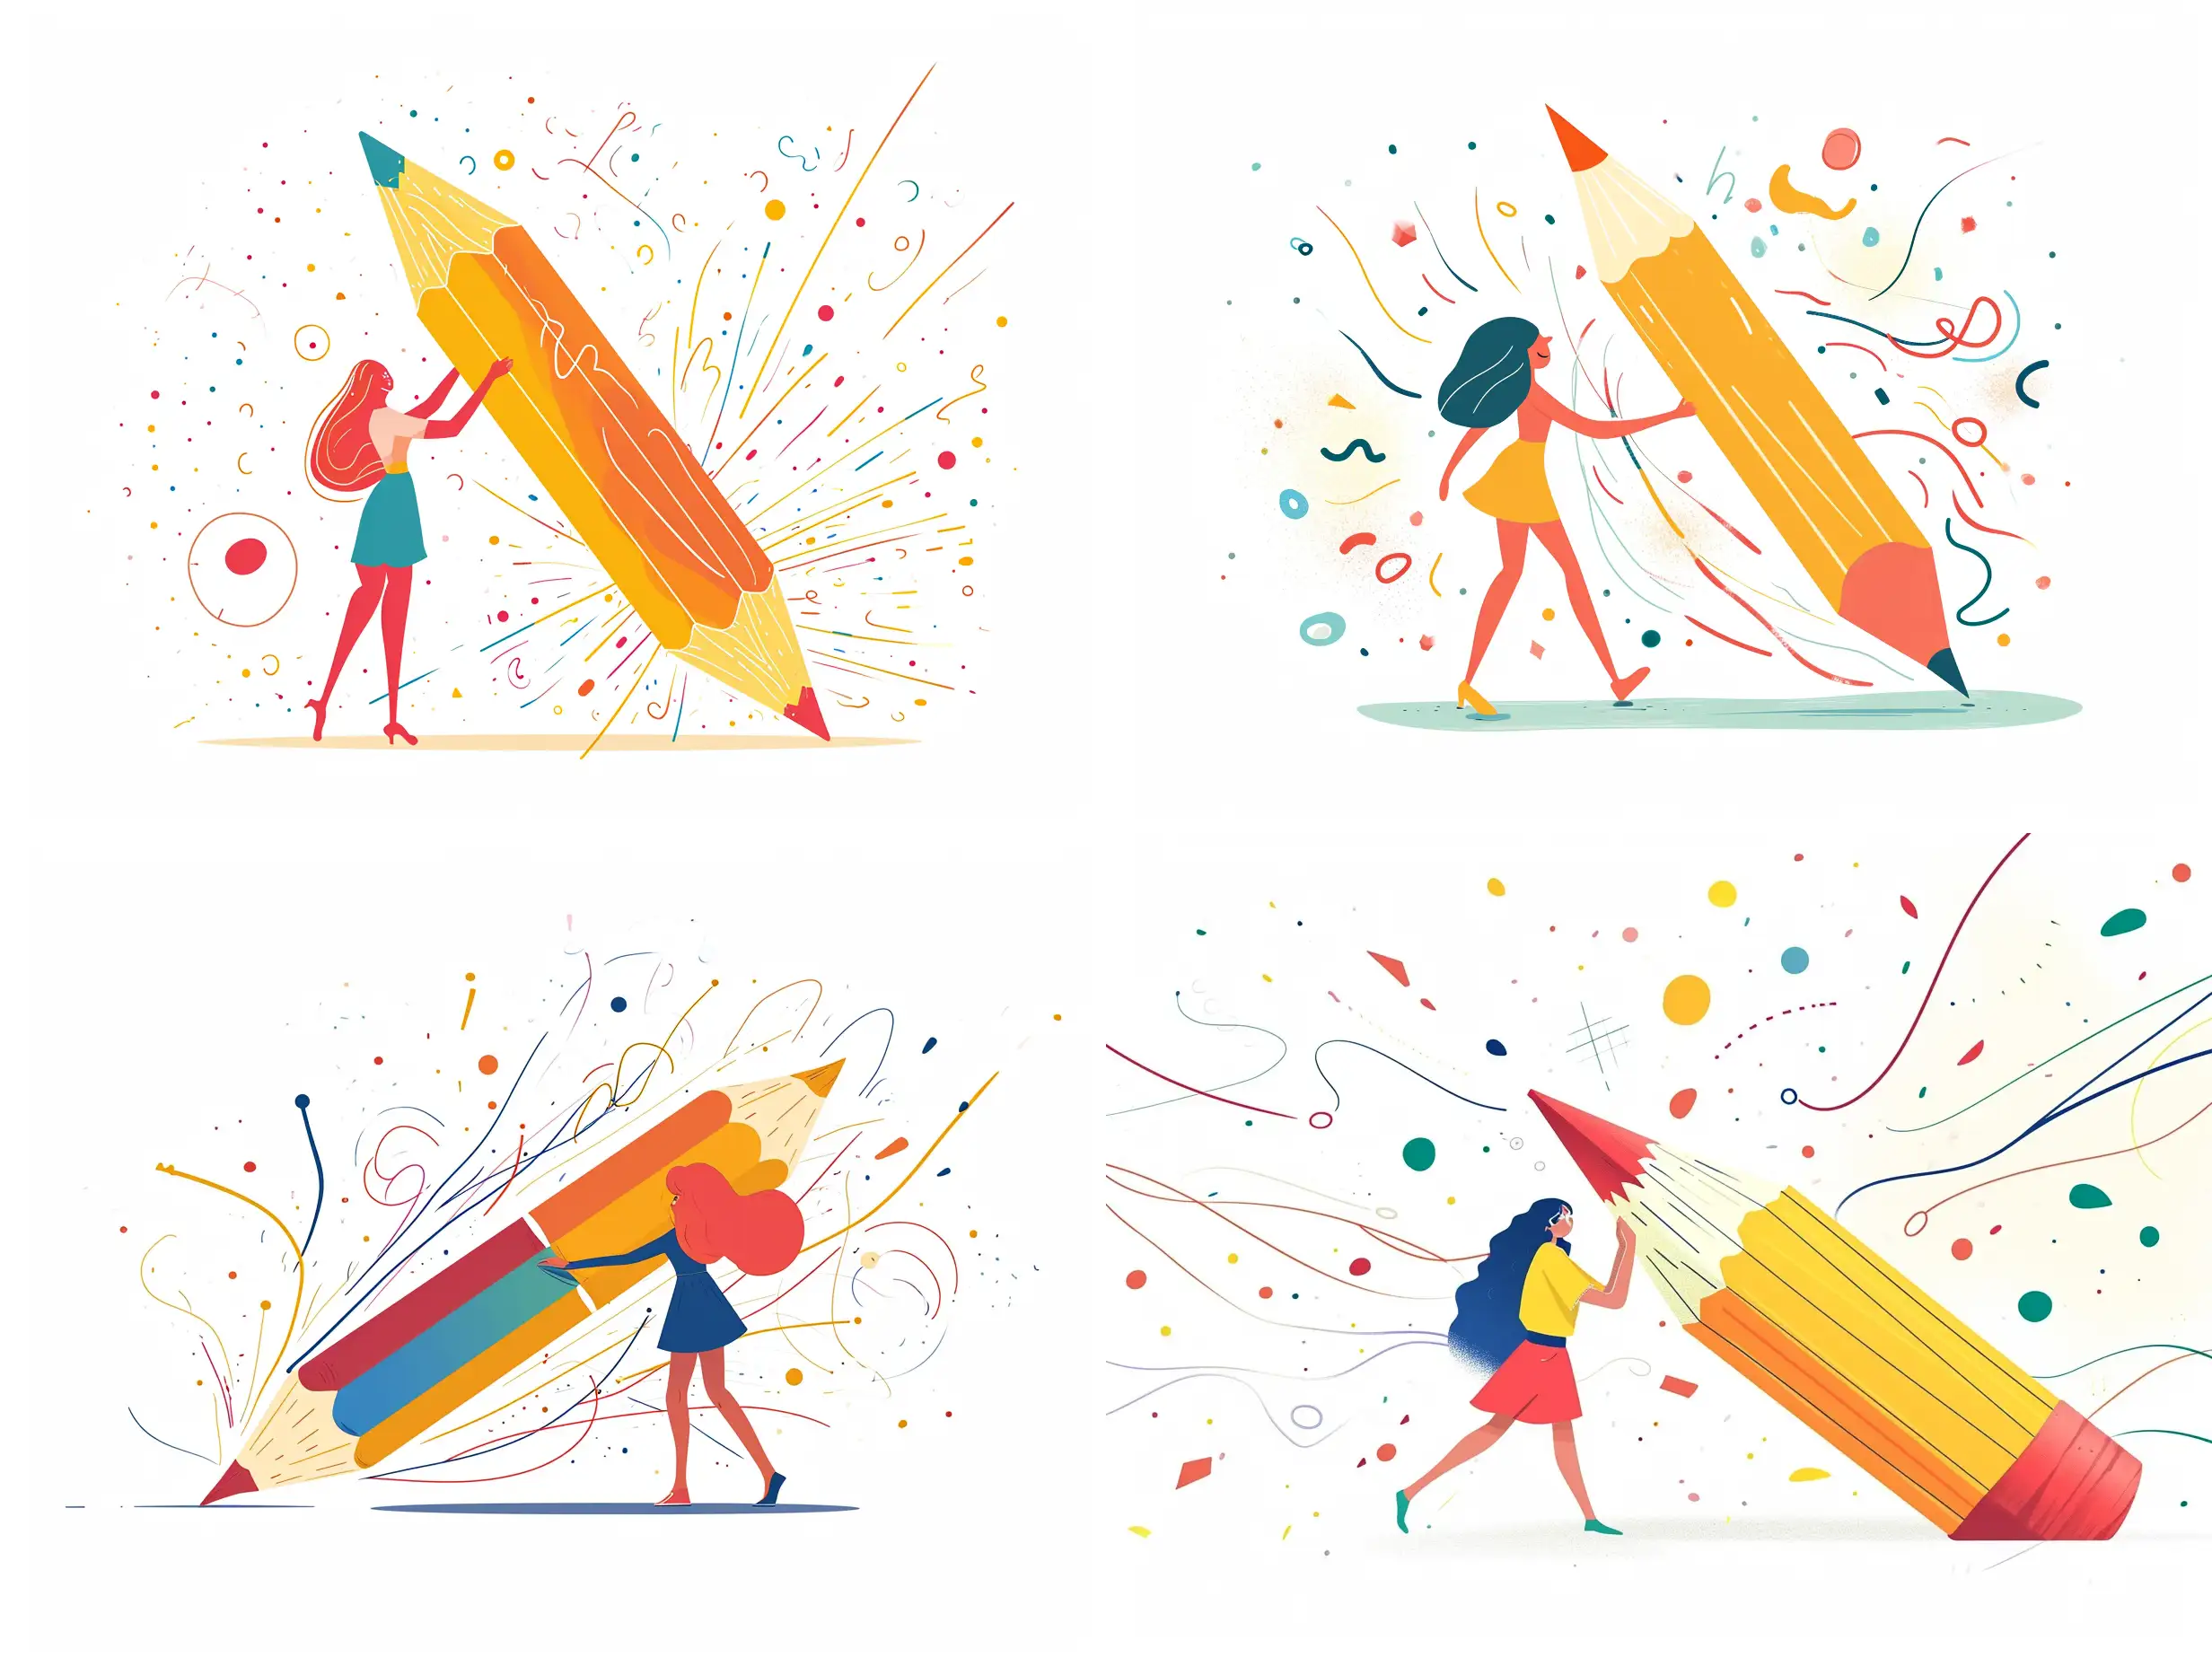 Stylized-Woman-with-Oversized-Pencil-in-Abstract-2D-Vector-Style